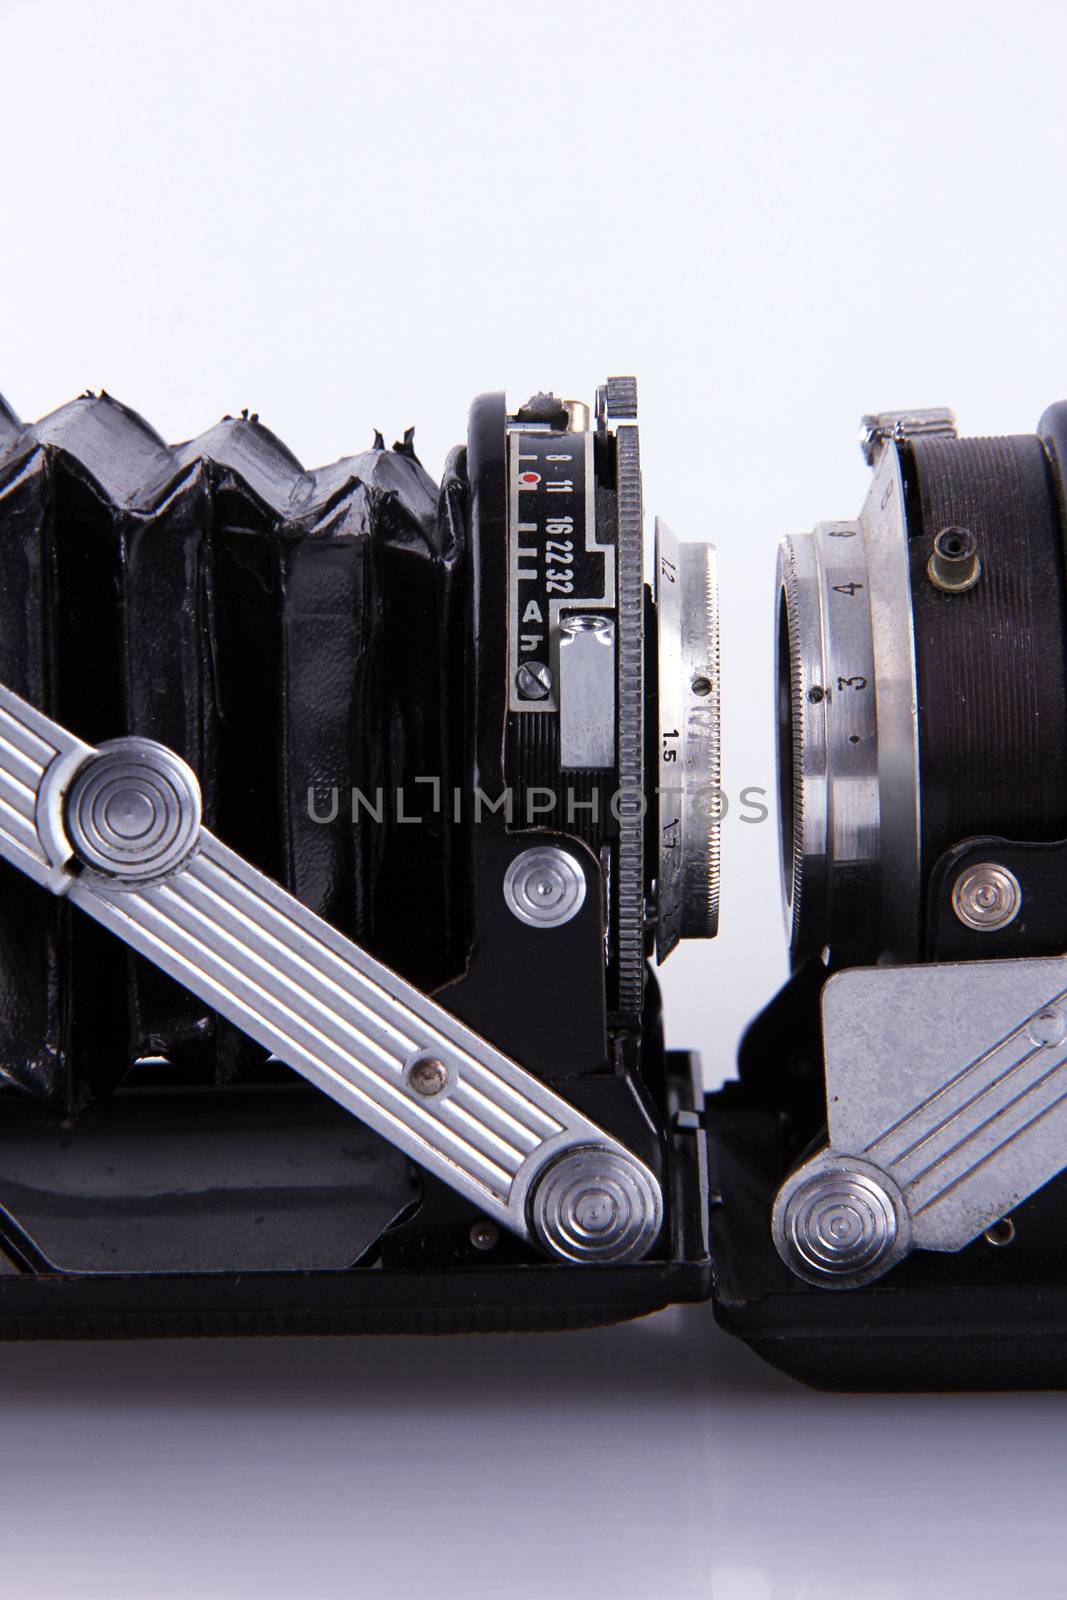 Details of an old analog retro Camera